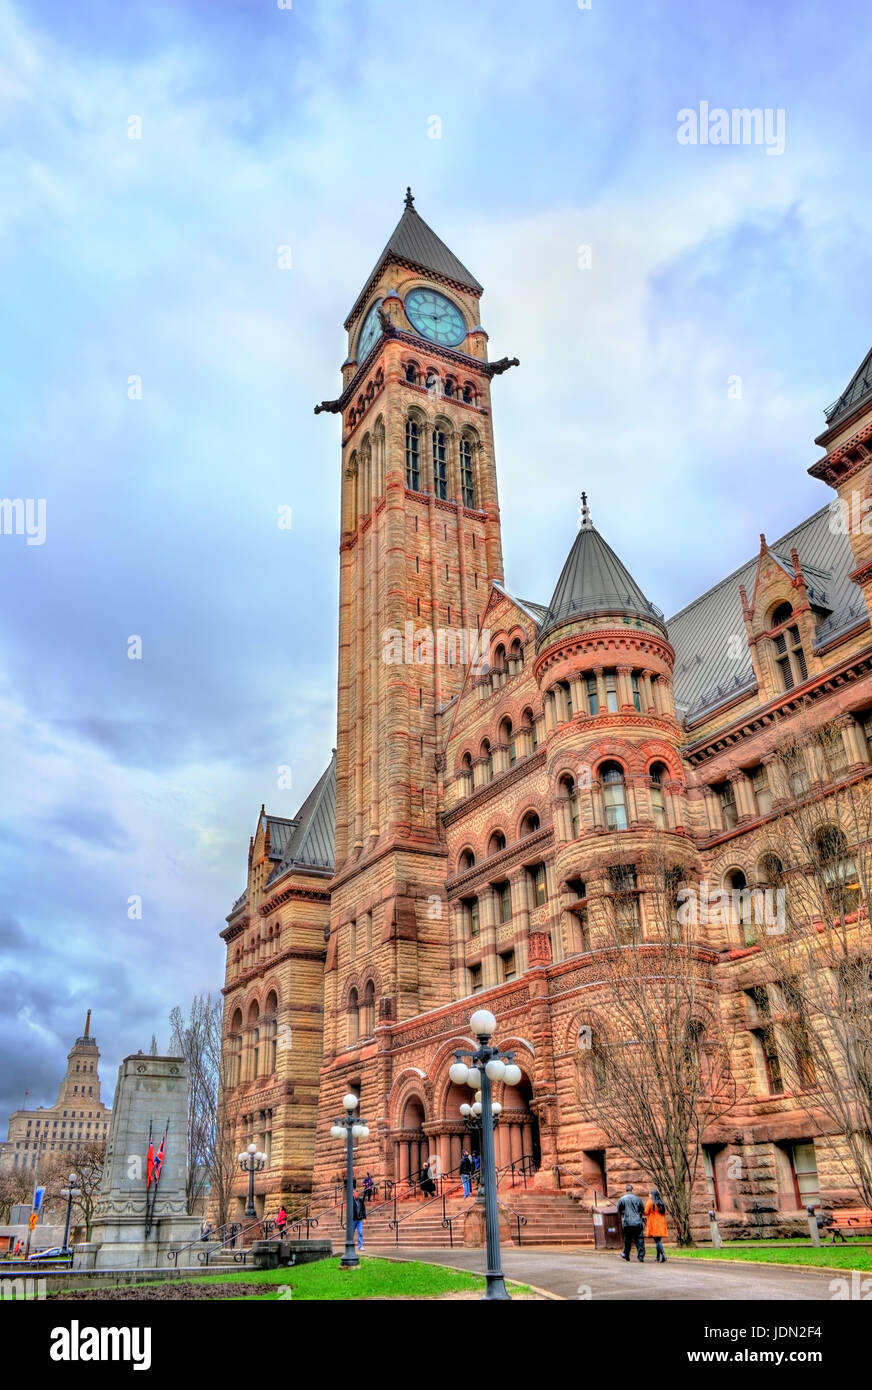 The Old City Hall, a Romanesque civic building and court house in Toronto, Canada Stock Photo